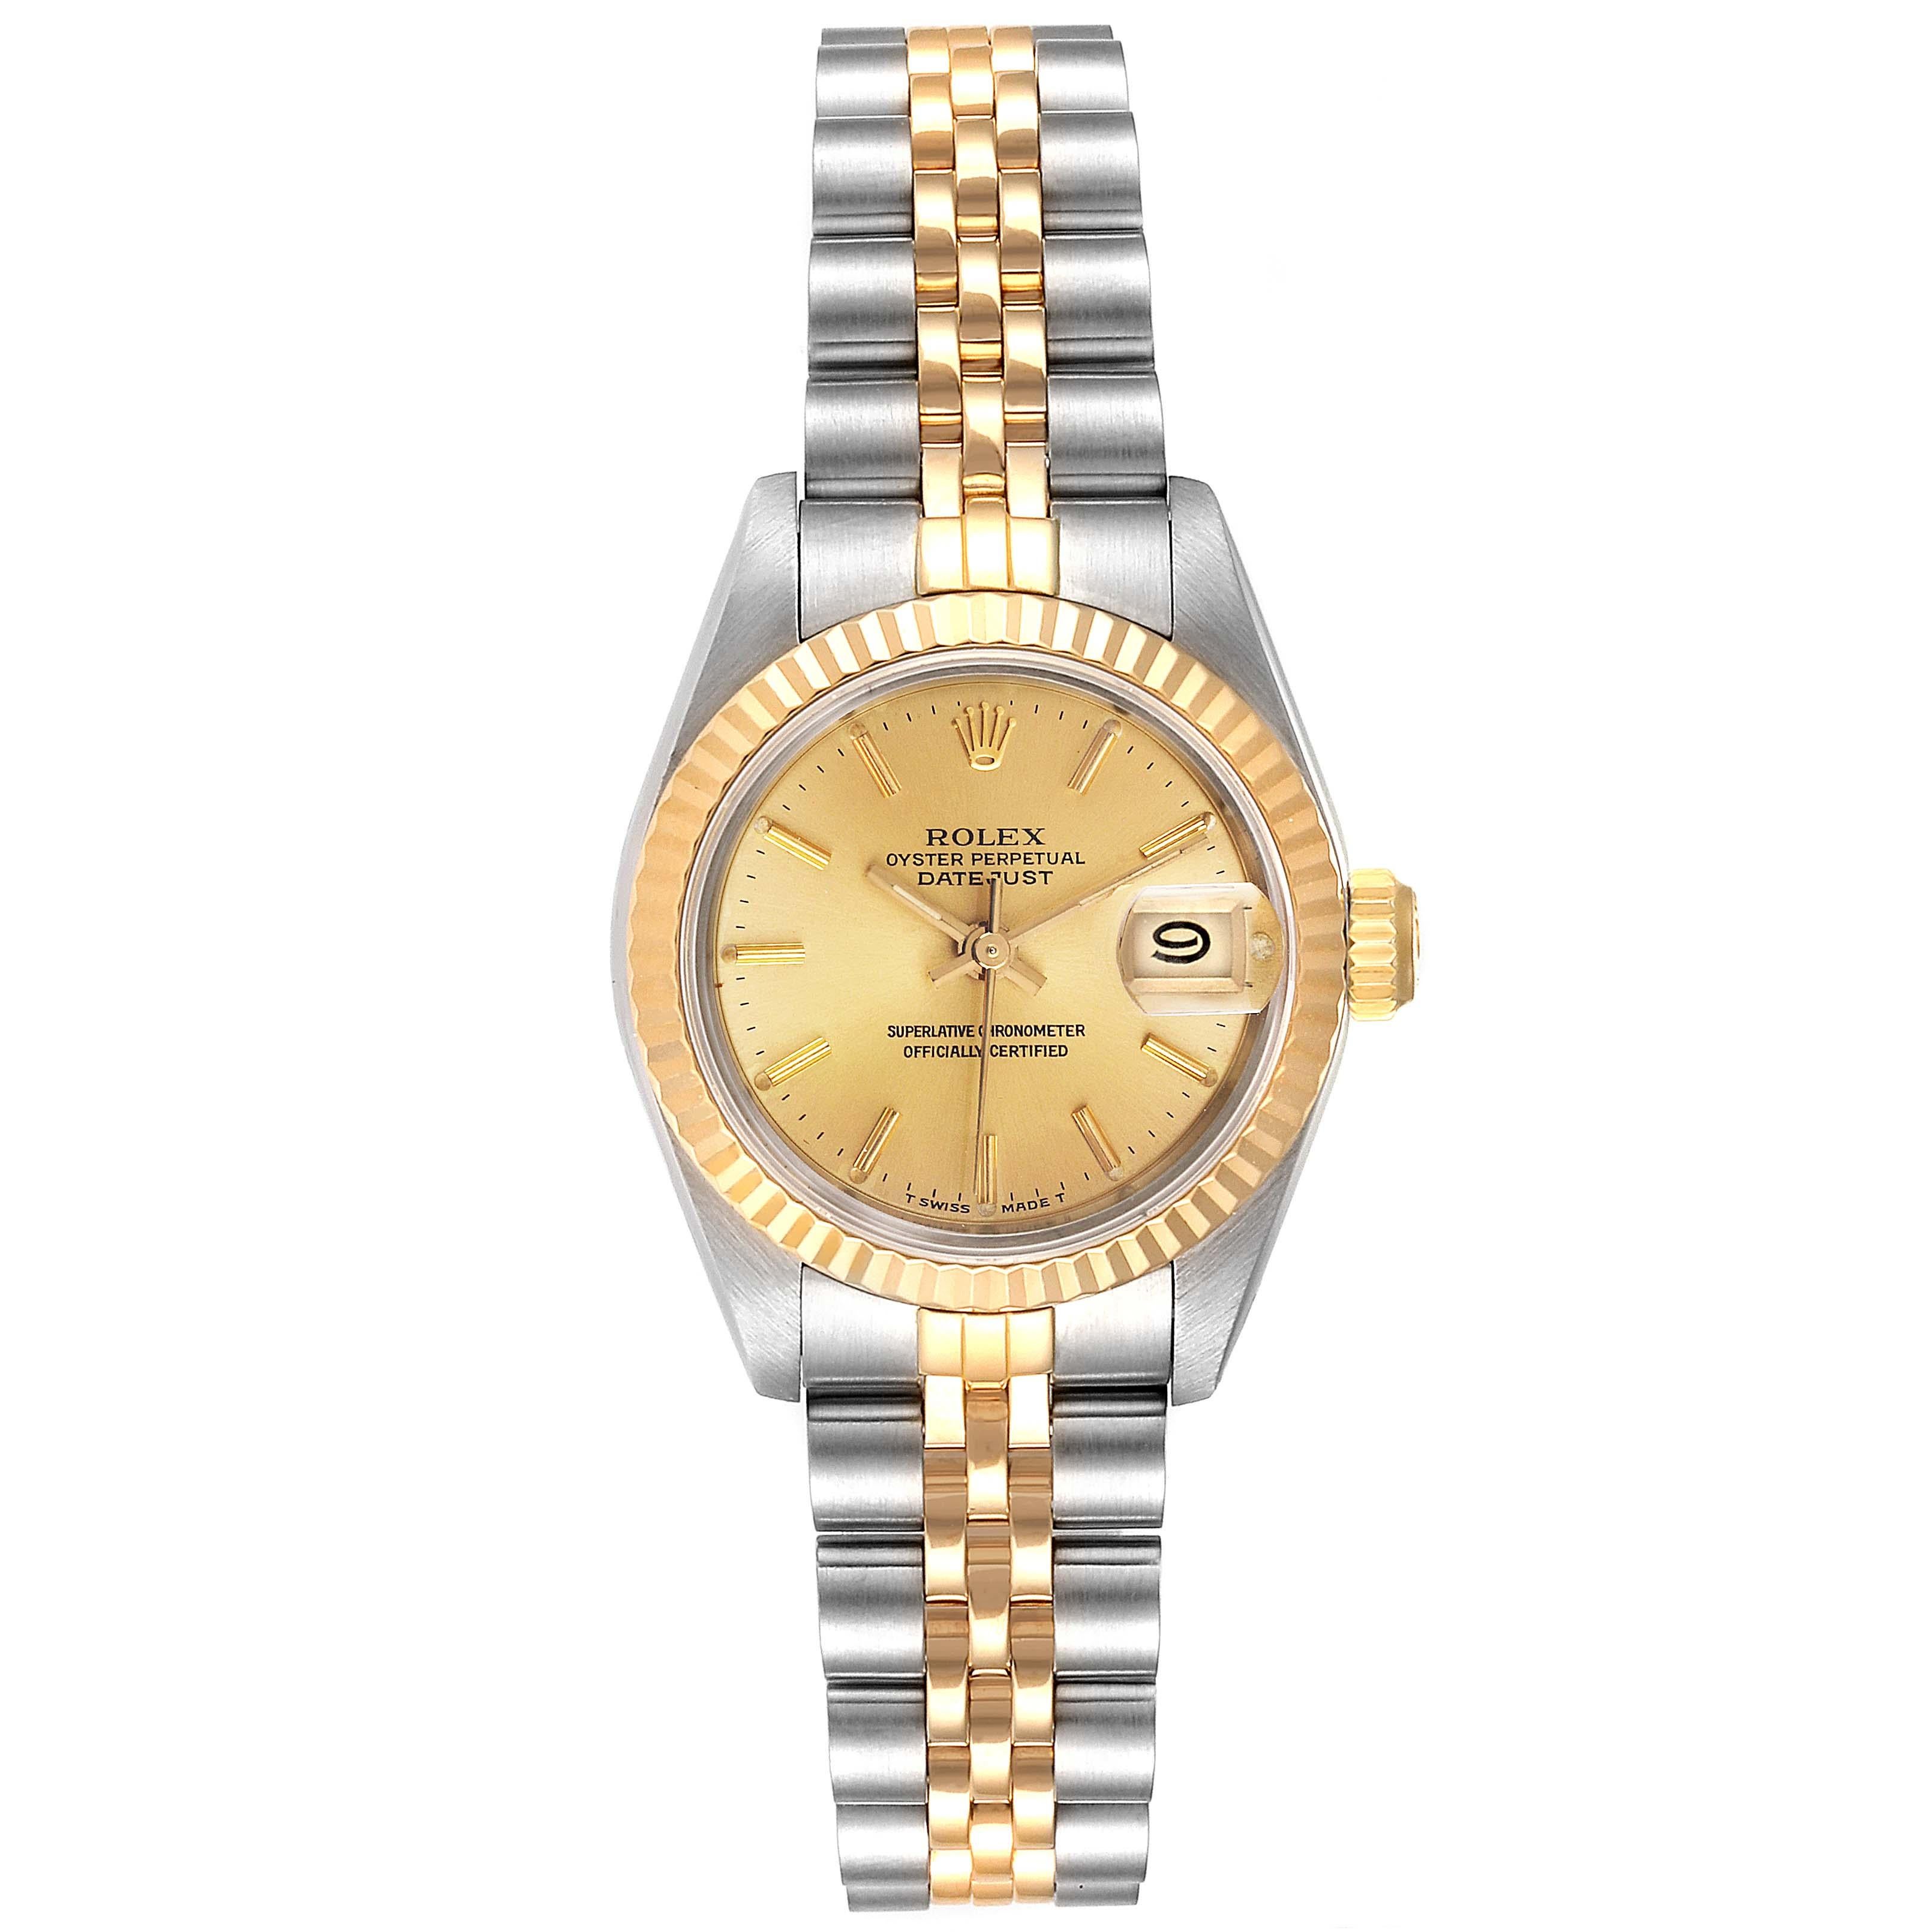 Rolex Datejust Steel Yellow Gold Jubilee Bracelet Ladies Watch 69173. Officially certified chronometer self-winding movement. Stainless steel oyster case 26.0 mm in diameter. Rolex logo on a crown. 18k yellow gold fluted bezel. Scratch resistant